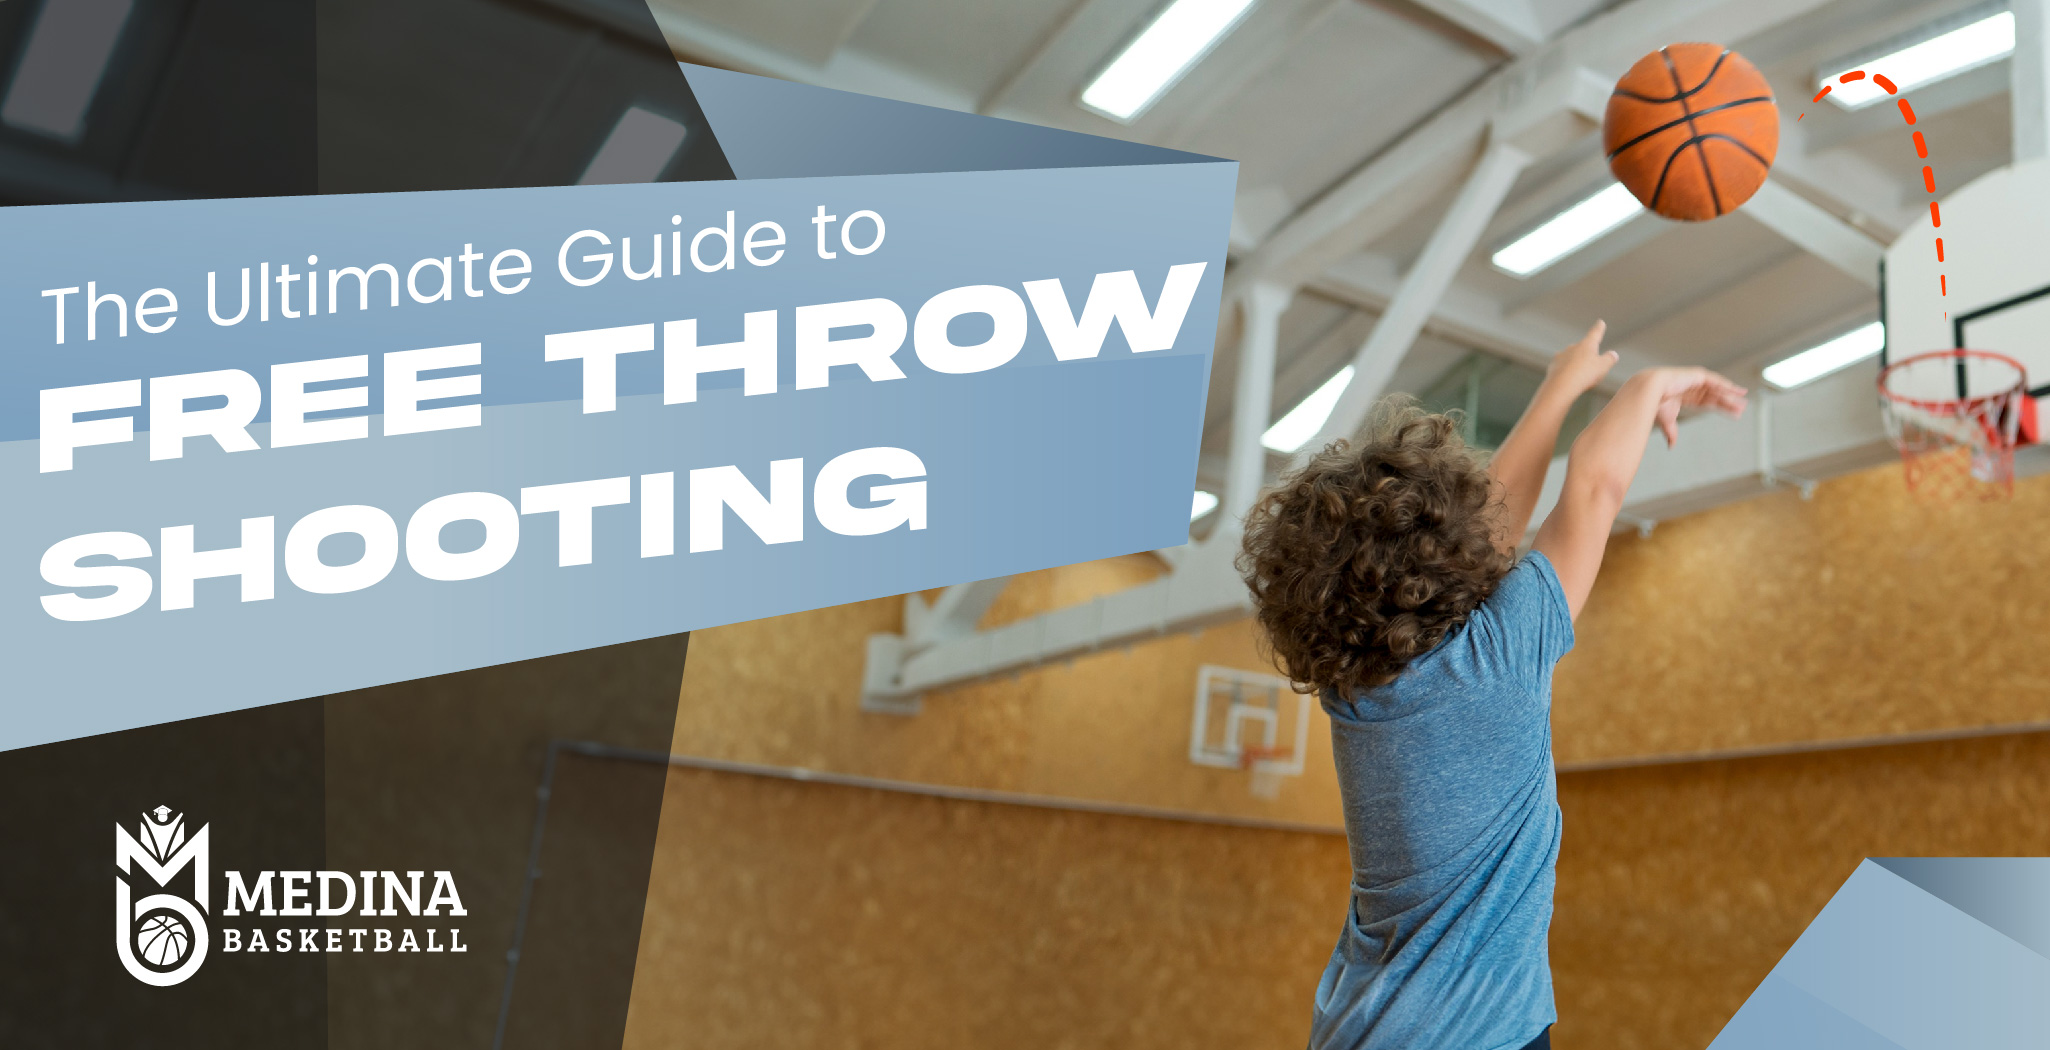 The Ultimate Guide to Free Throw Shooting